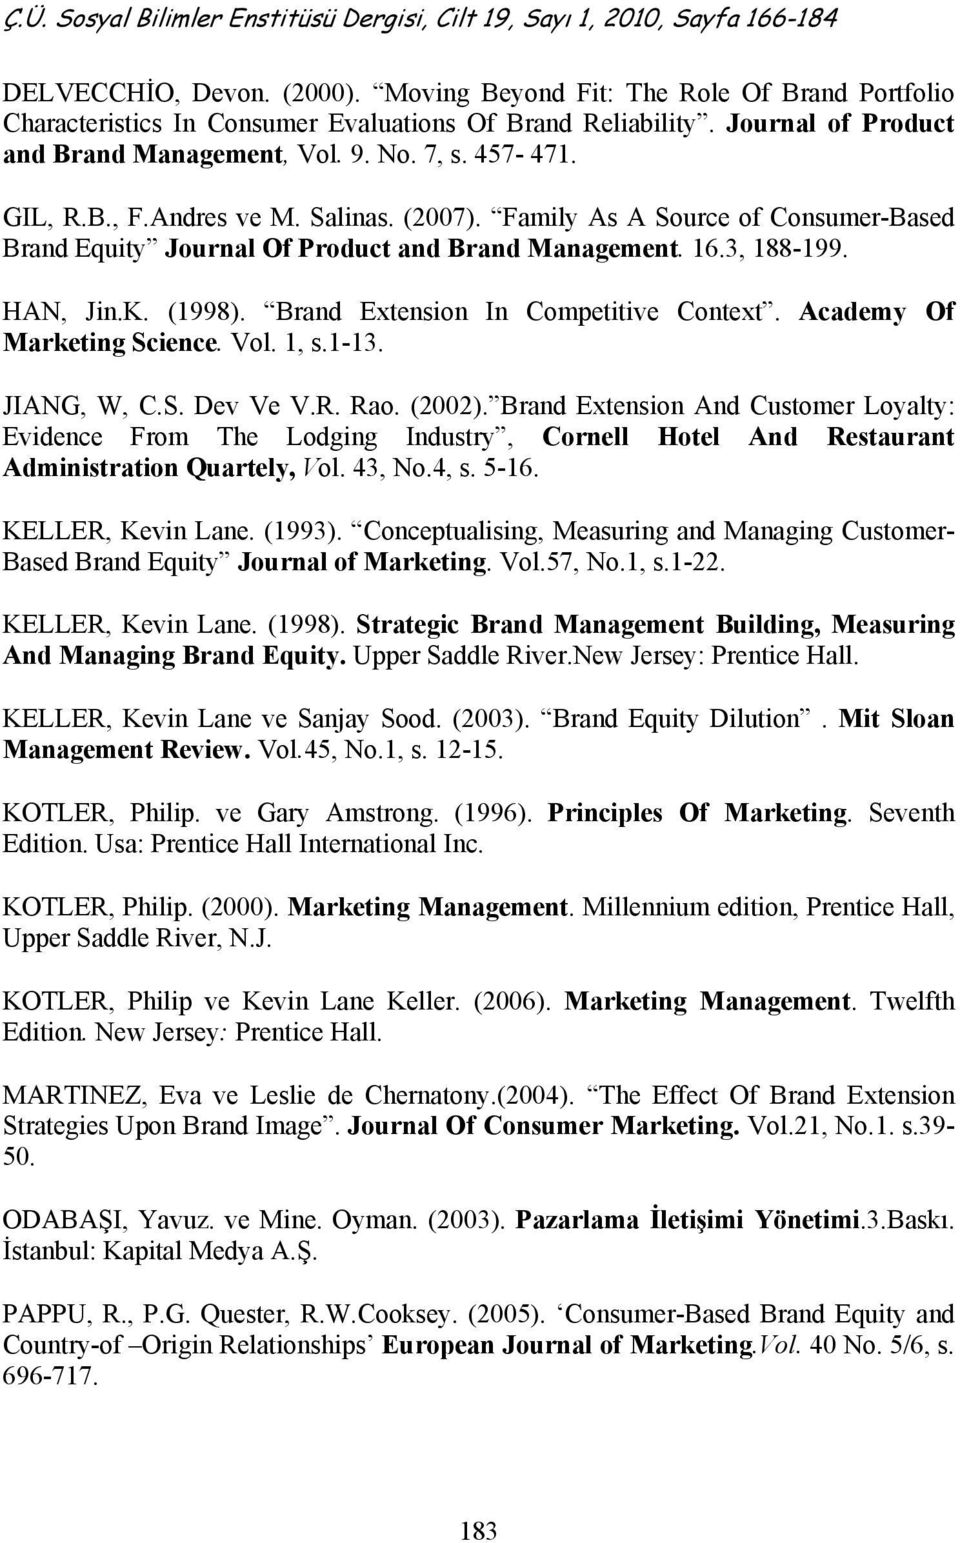 Brand Extension In Competitive Context. Academy Of Marketing Science. Vol. 1, s.1-13. JIANG, W, C.S. Dev Ve V.R. Rao. (2002).